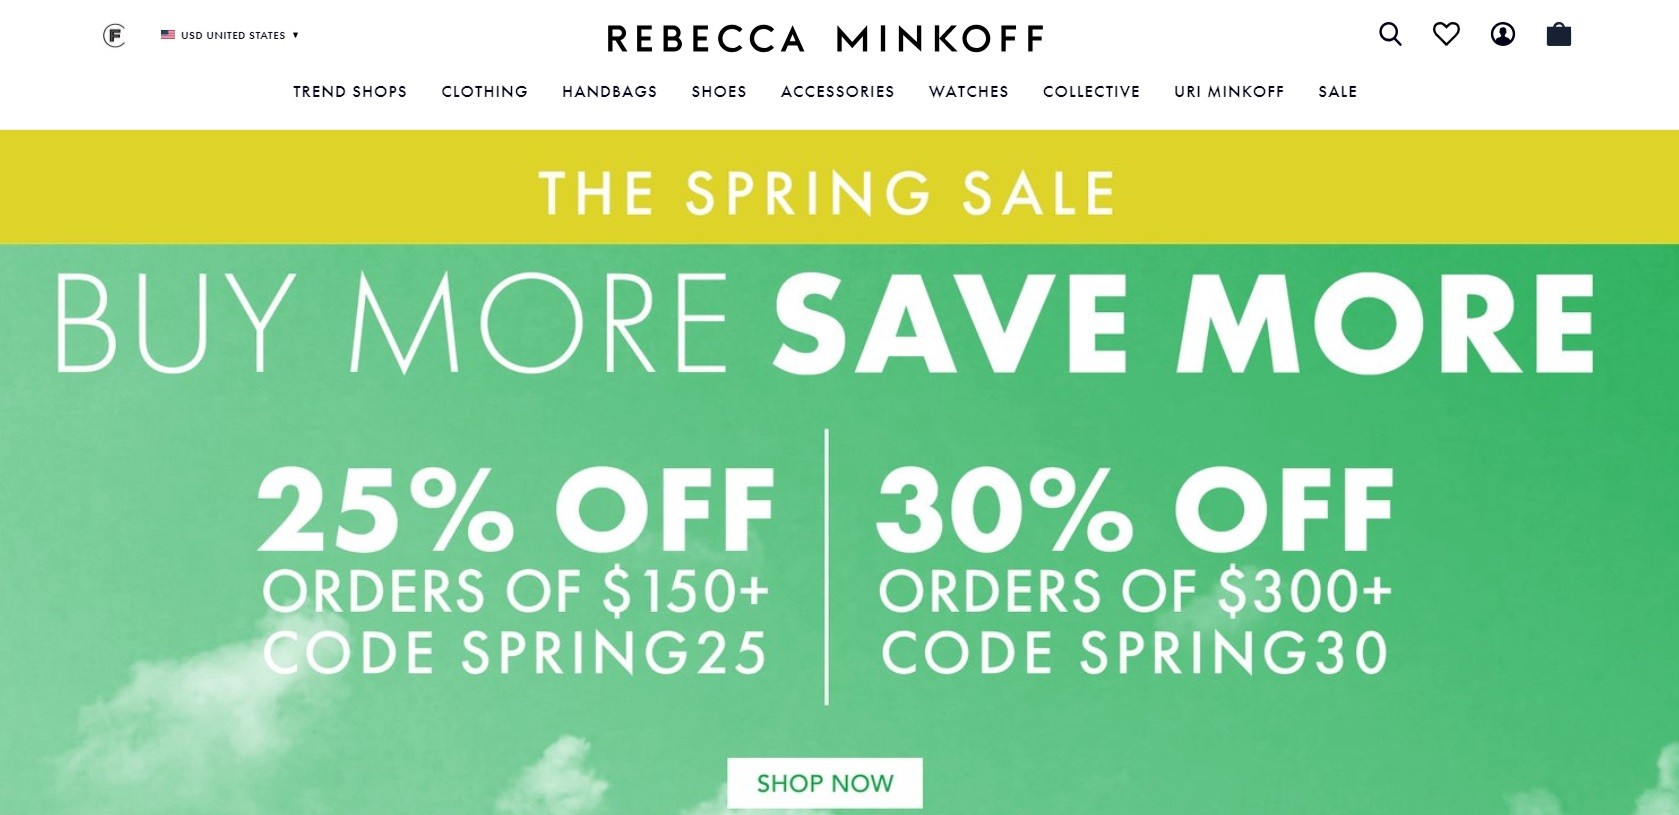 platform clothing store  An industry leader in accessible luxury handbags, footwear, and apparel Rebecca Minkoff’s uses Shopify platform for their clothing stor